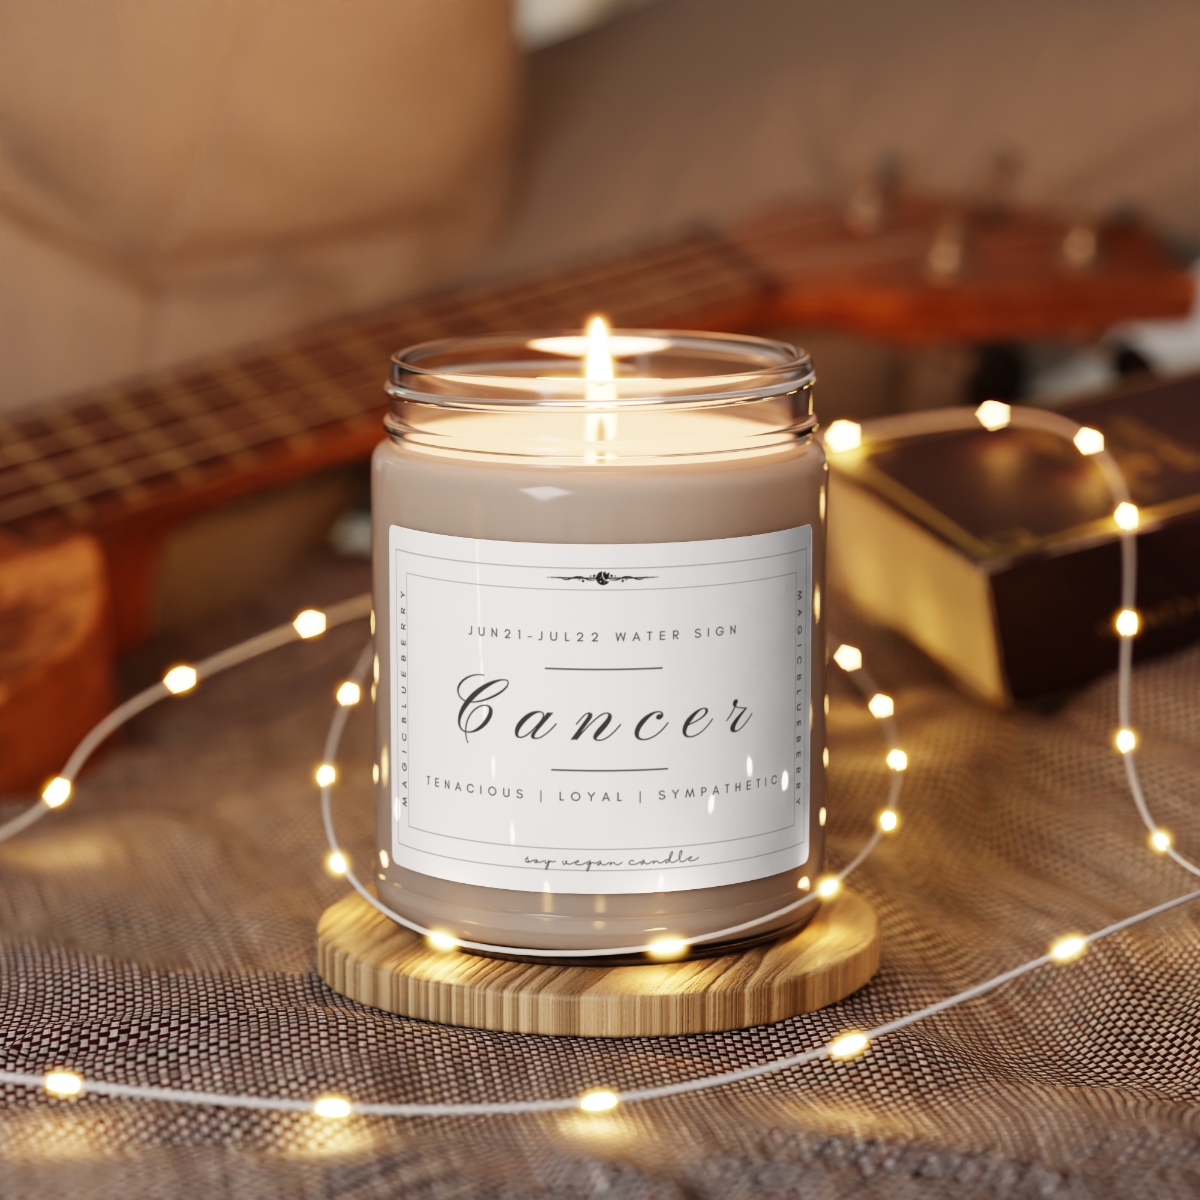 Cancer - Scented Vegan Soy Wax Candle Clear Jar Candle, Spell Candle, Sassy Candle Vegan Candle Cotton Wick Candle Home Deco product thumbnail image